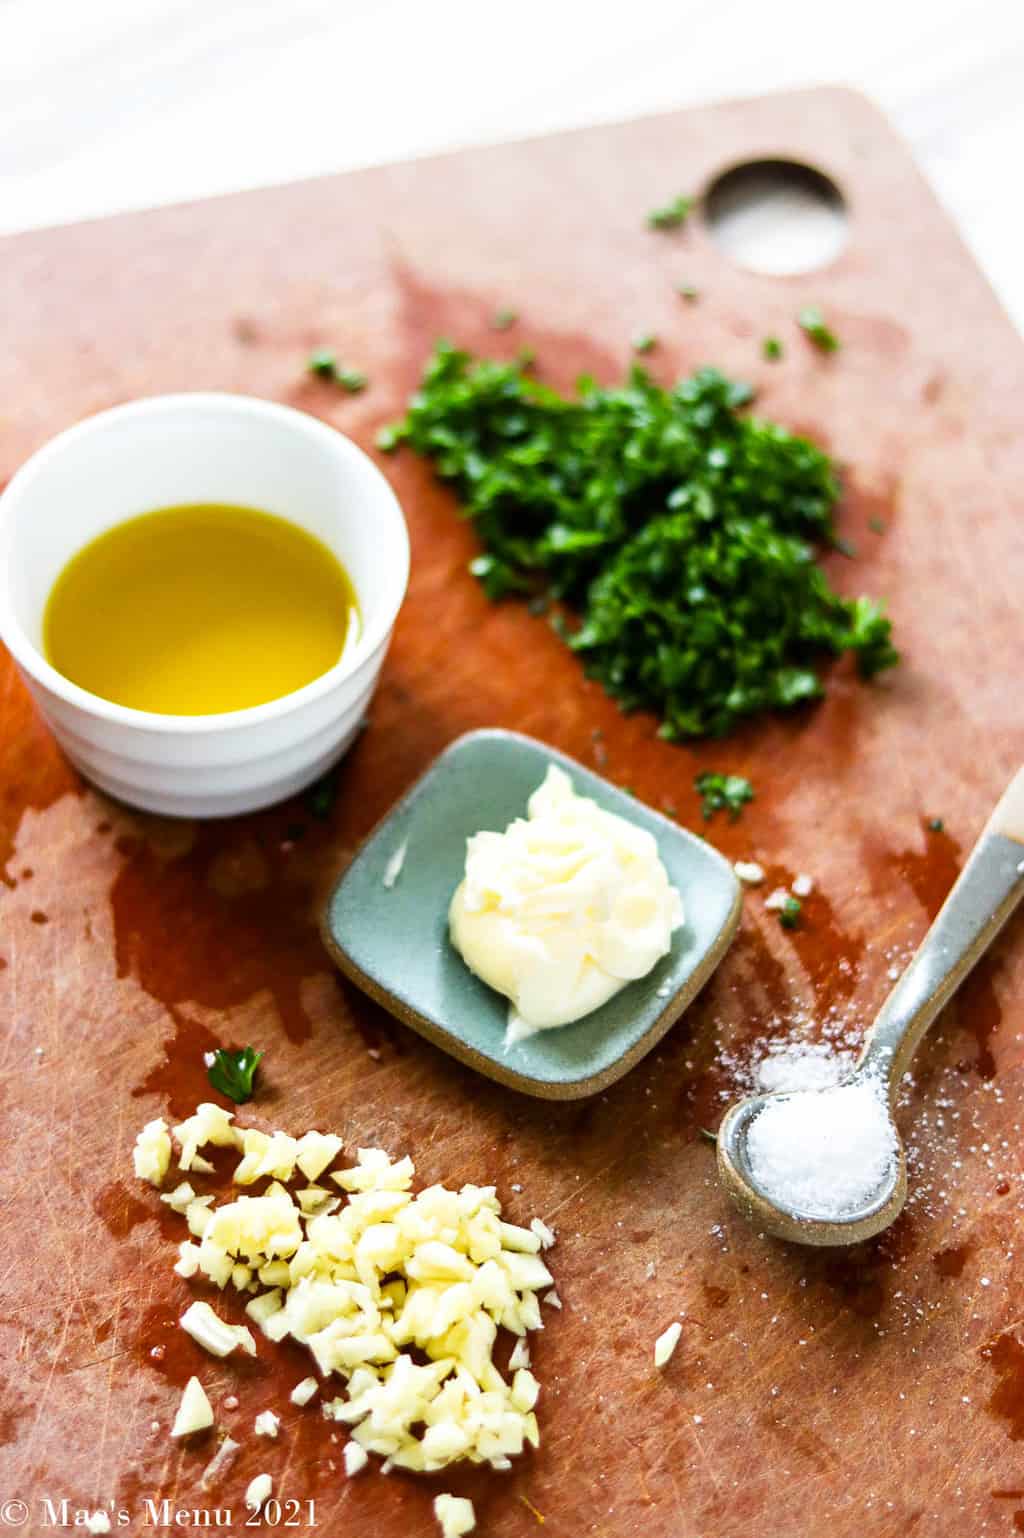 A cutting board with parsley, butter, salt, olive oil, and garlic on it